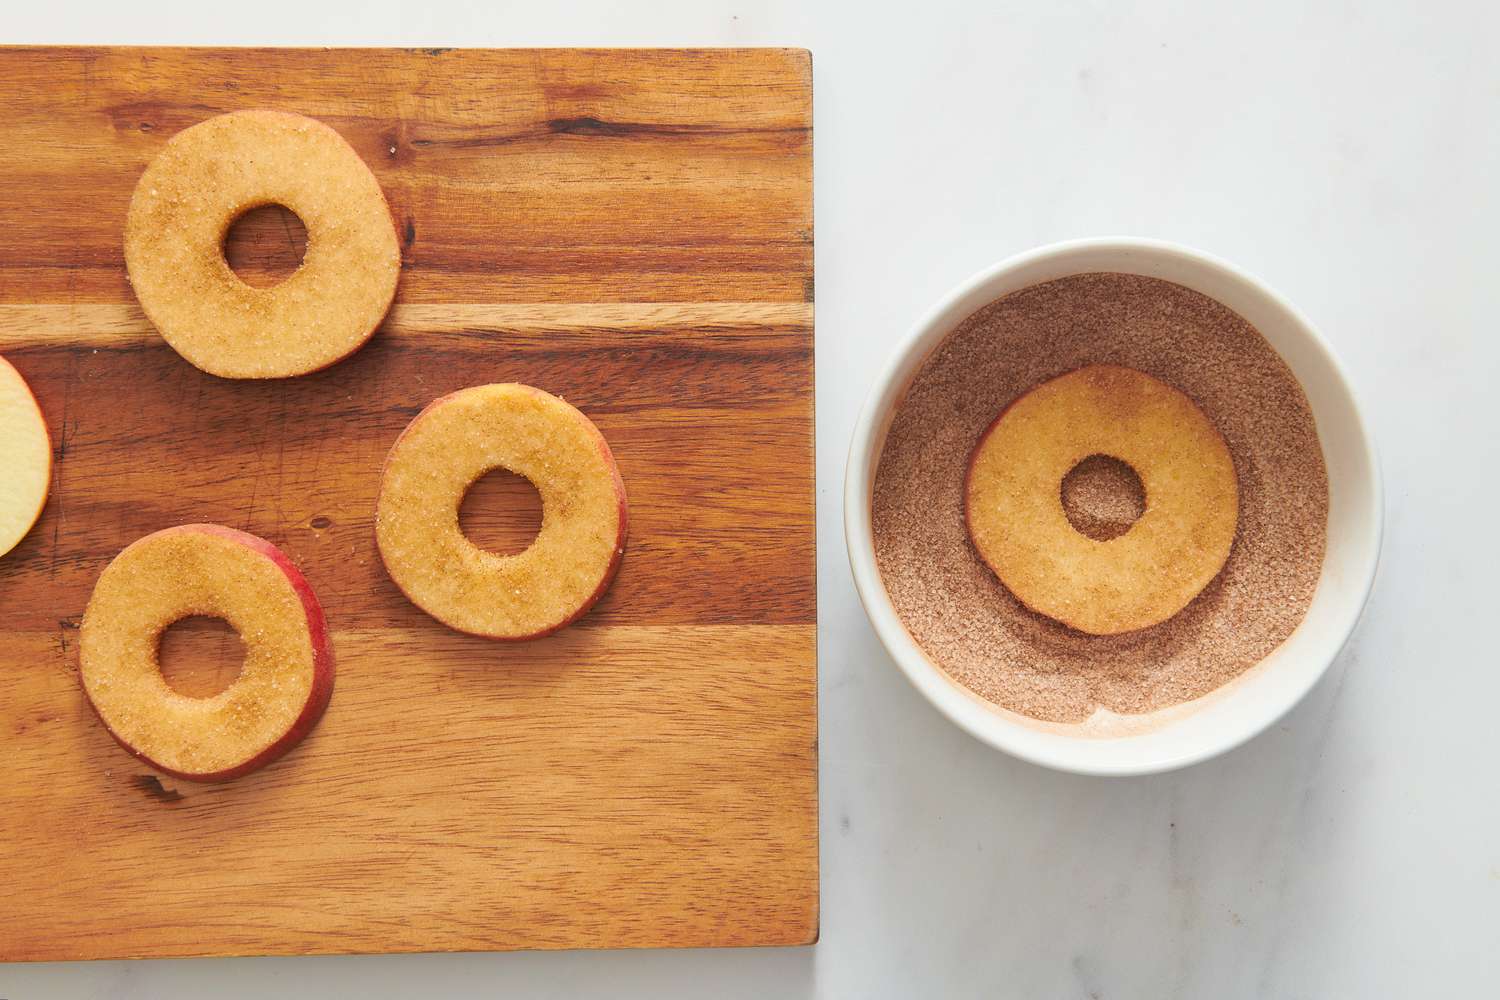 A small bowl of cinnamon sugar with an apple ring being dipped, next to a cutting board with apple rings coated in cinnamon sugar